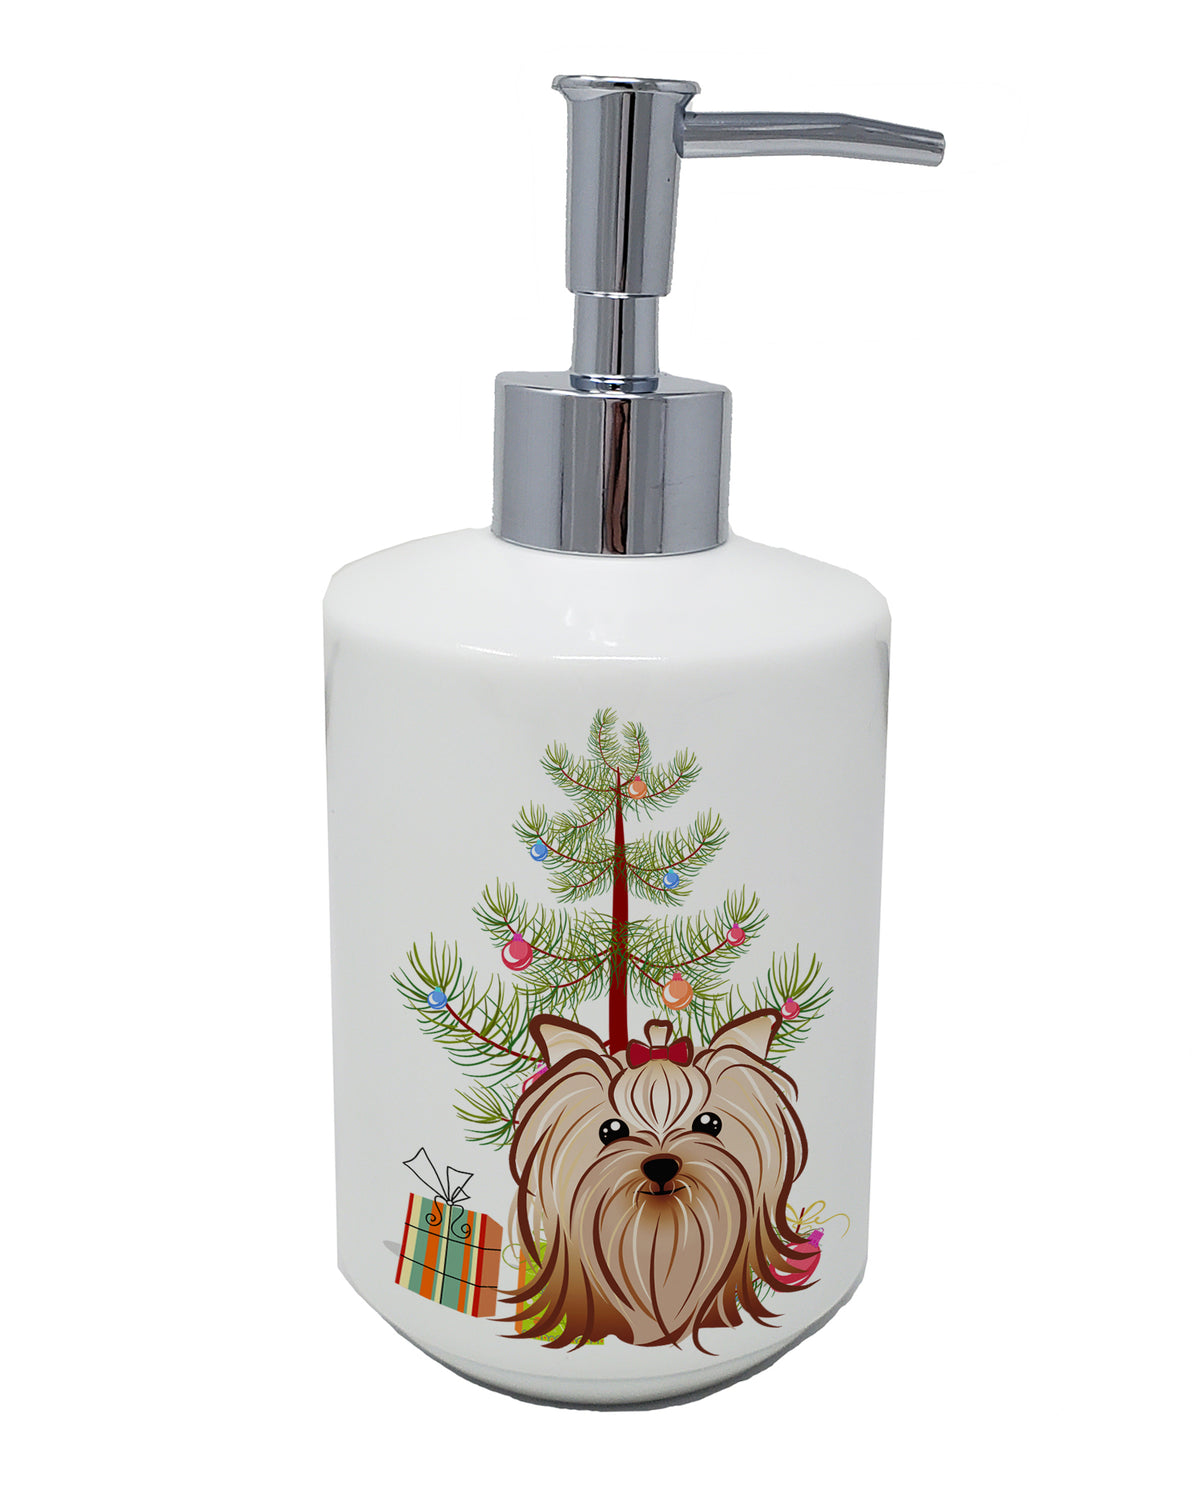 Buy this Christmas Tree and Yorkie Yorkishire Terrier Ceramic Soap Dispenser